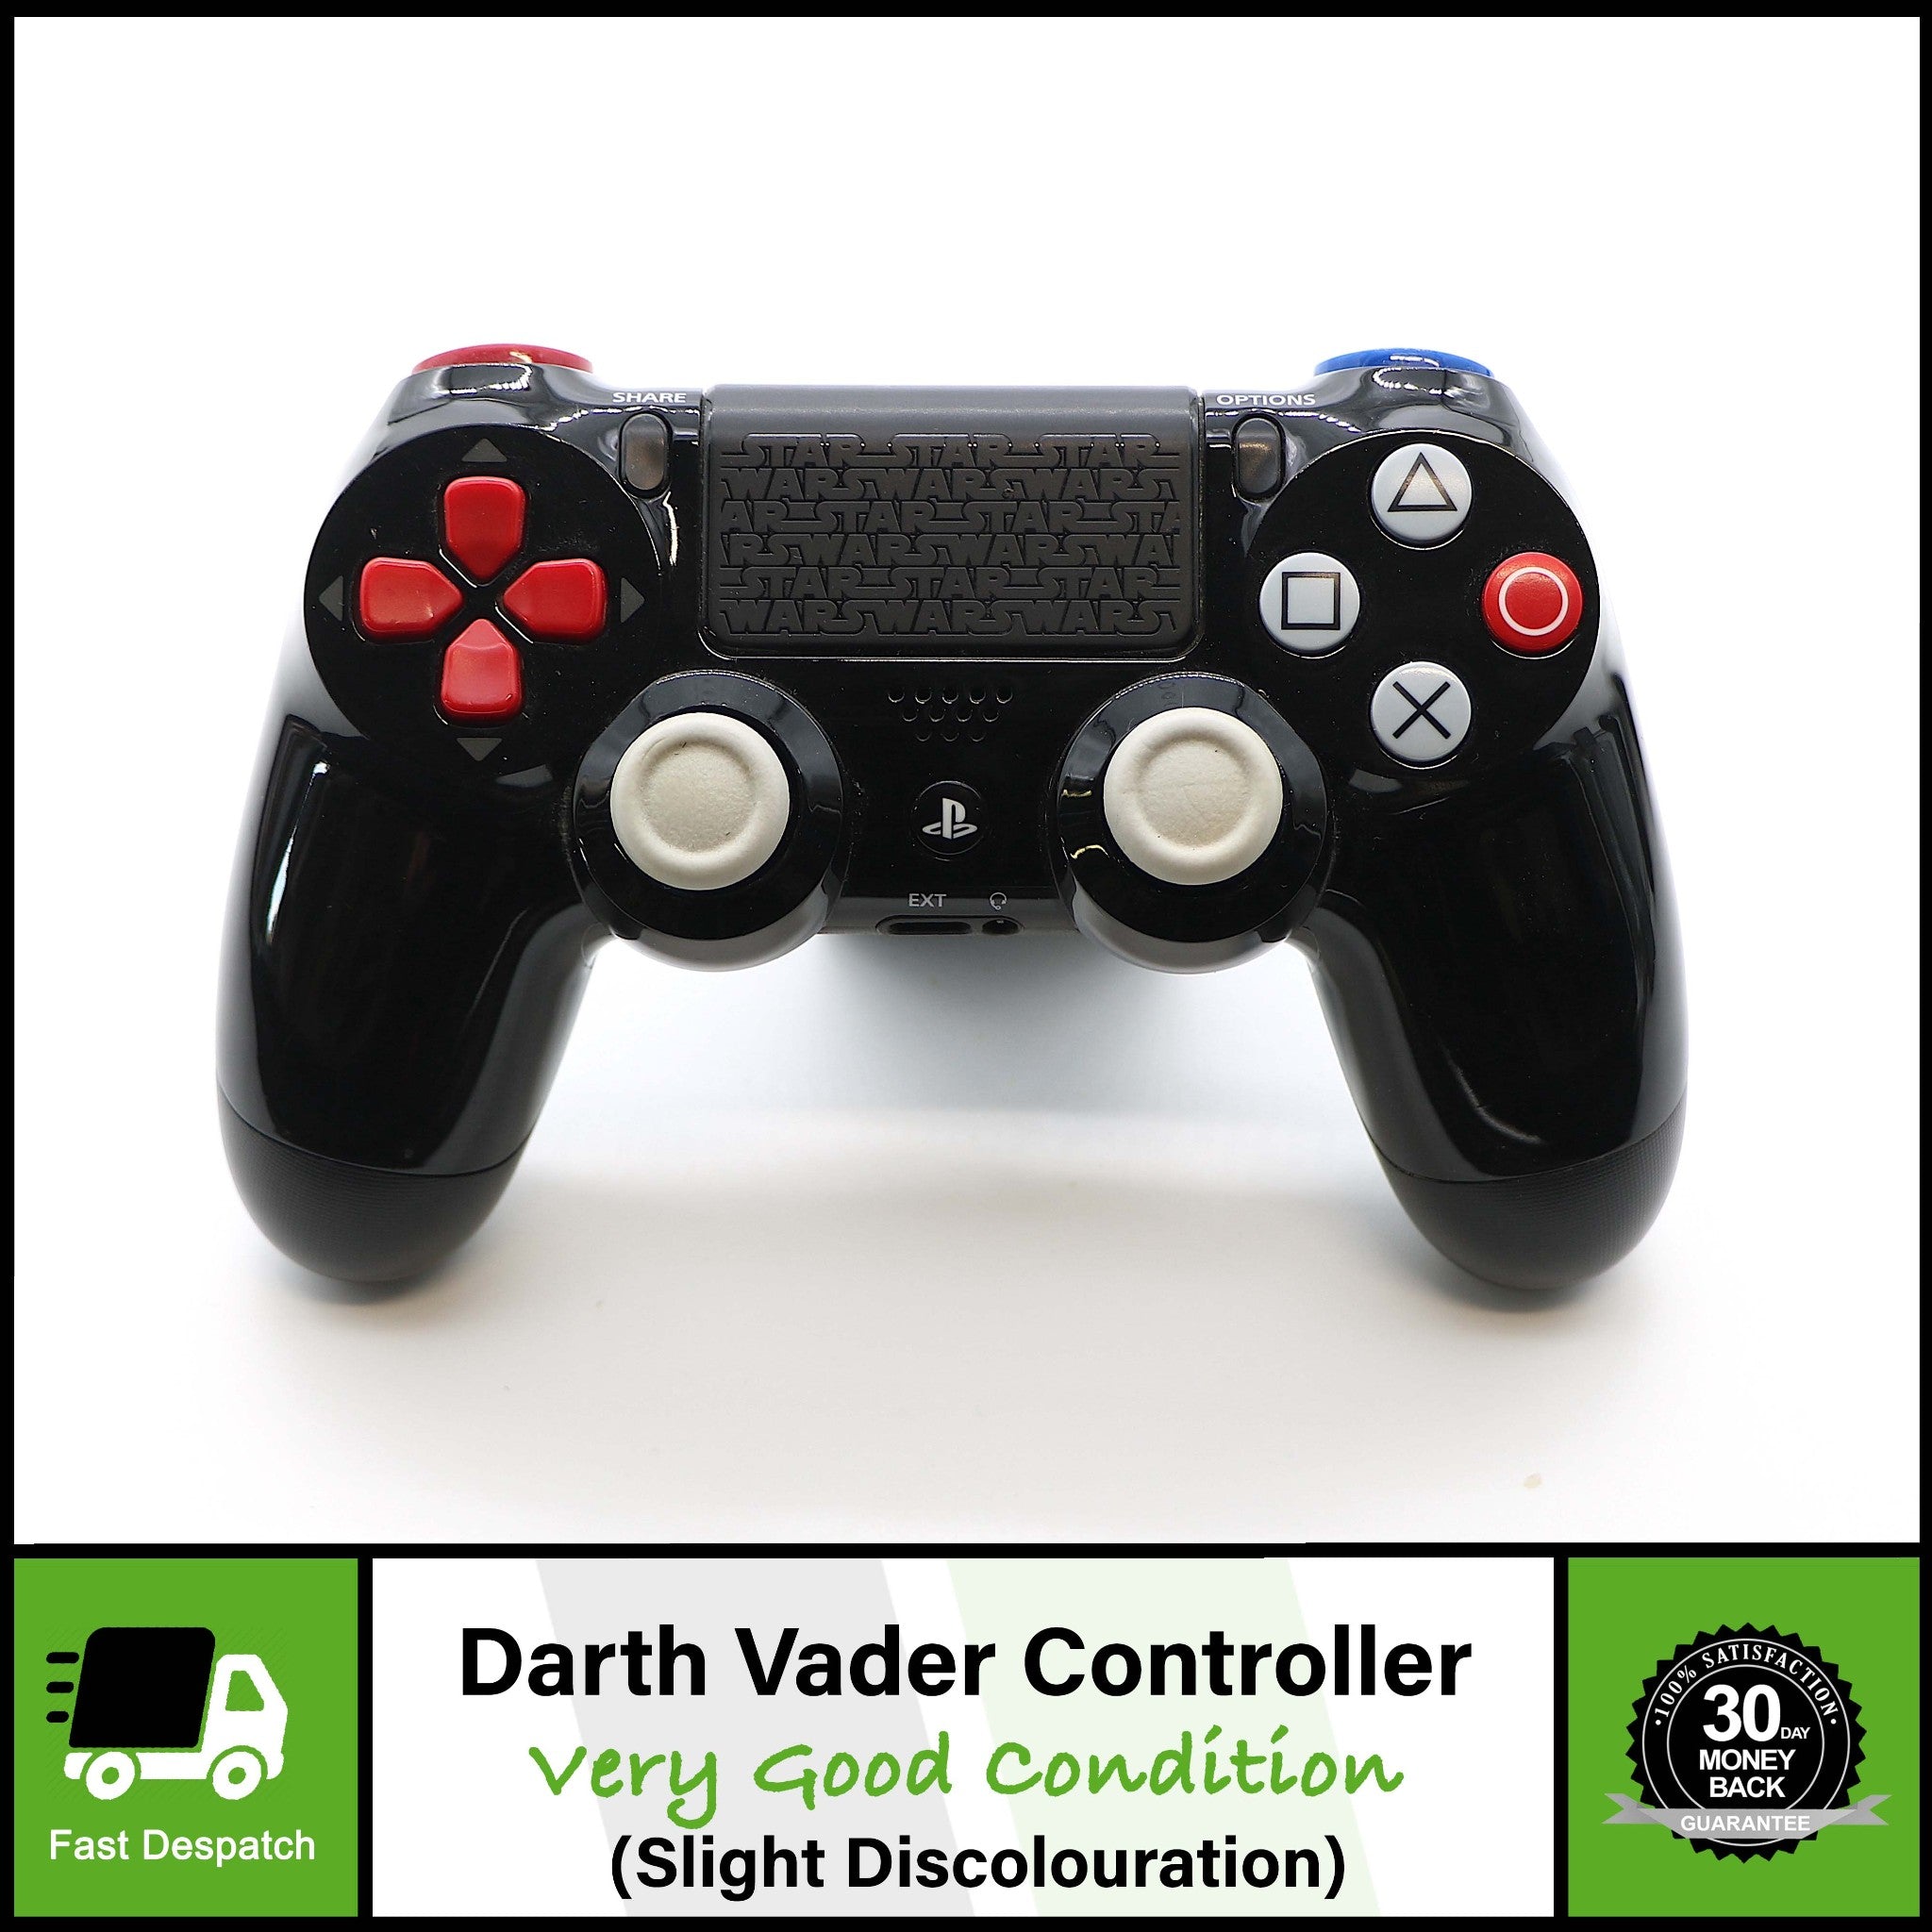 Official Sony Star Wars Darth Vader DualShock 4 Controller Pad For PS4 | VGC